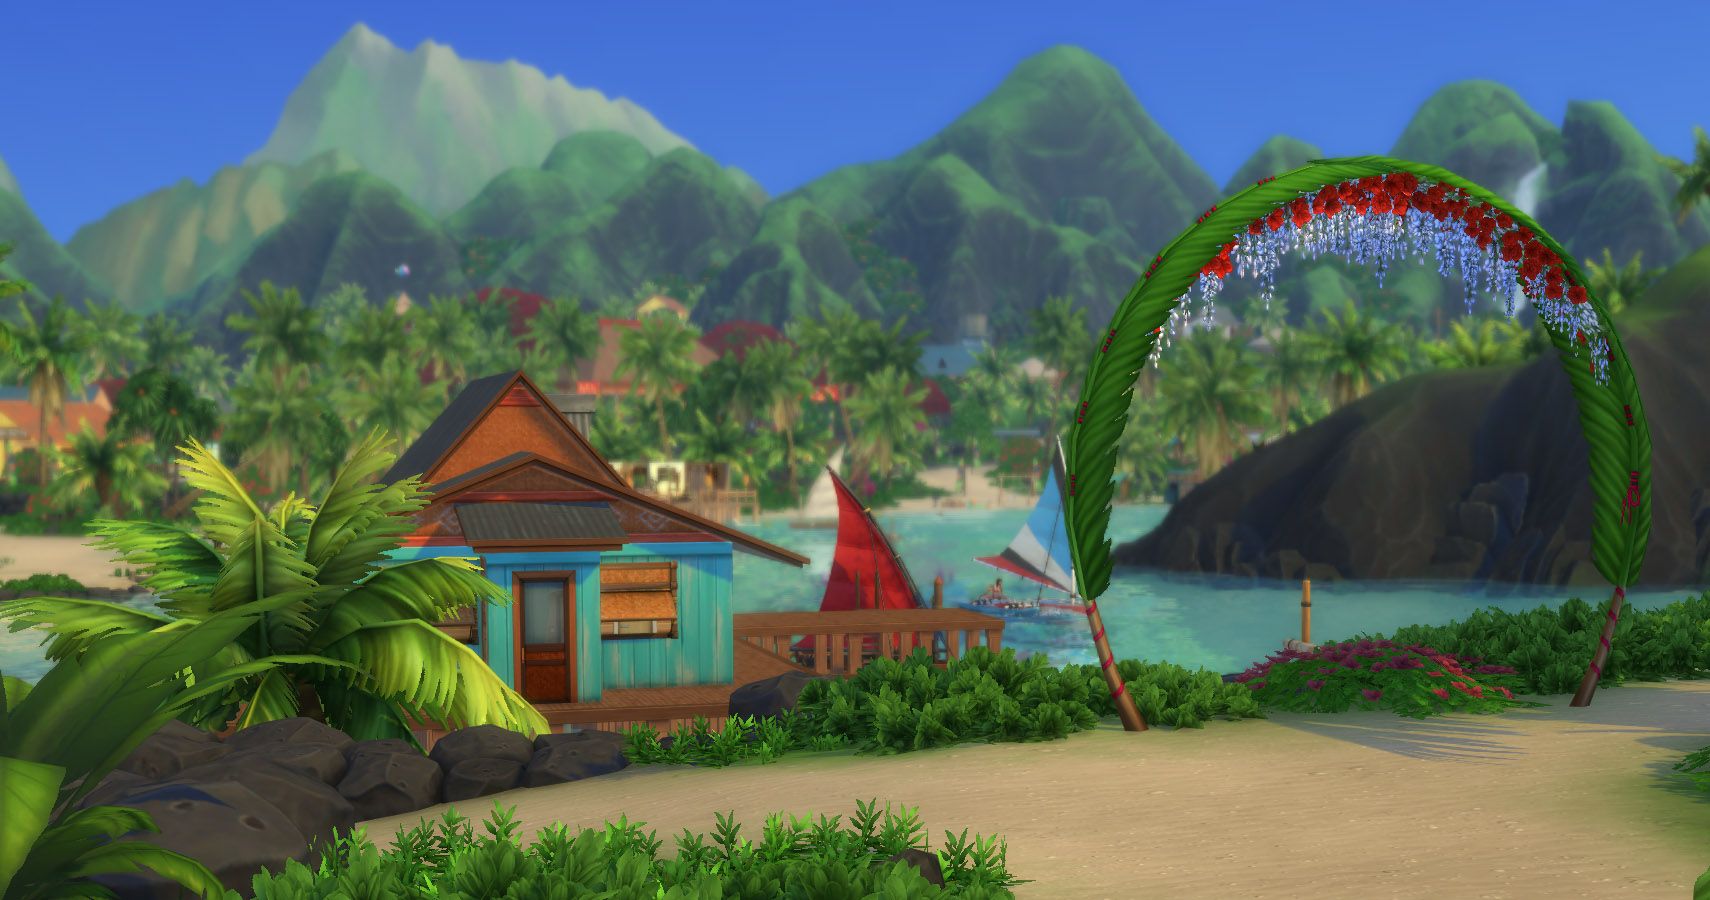 Lists Of The Best Sims 4 Expansion Packs Are Pointless